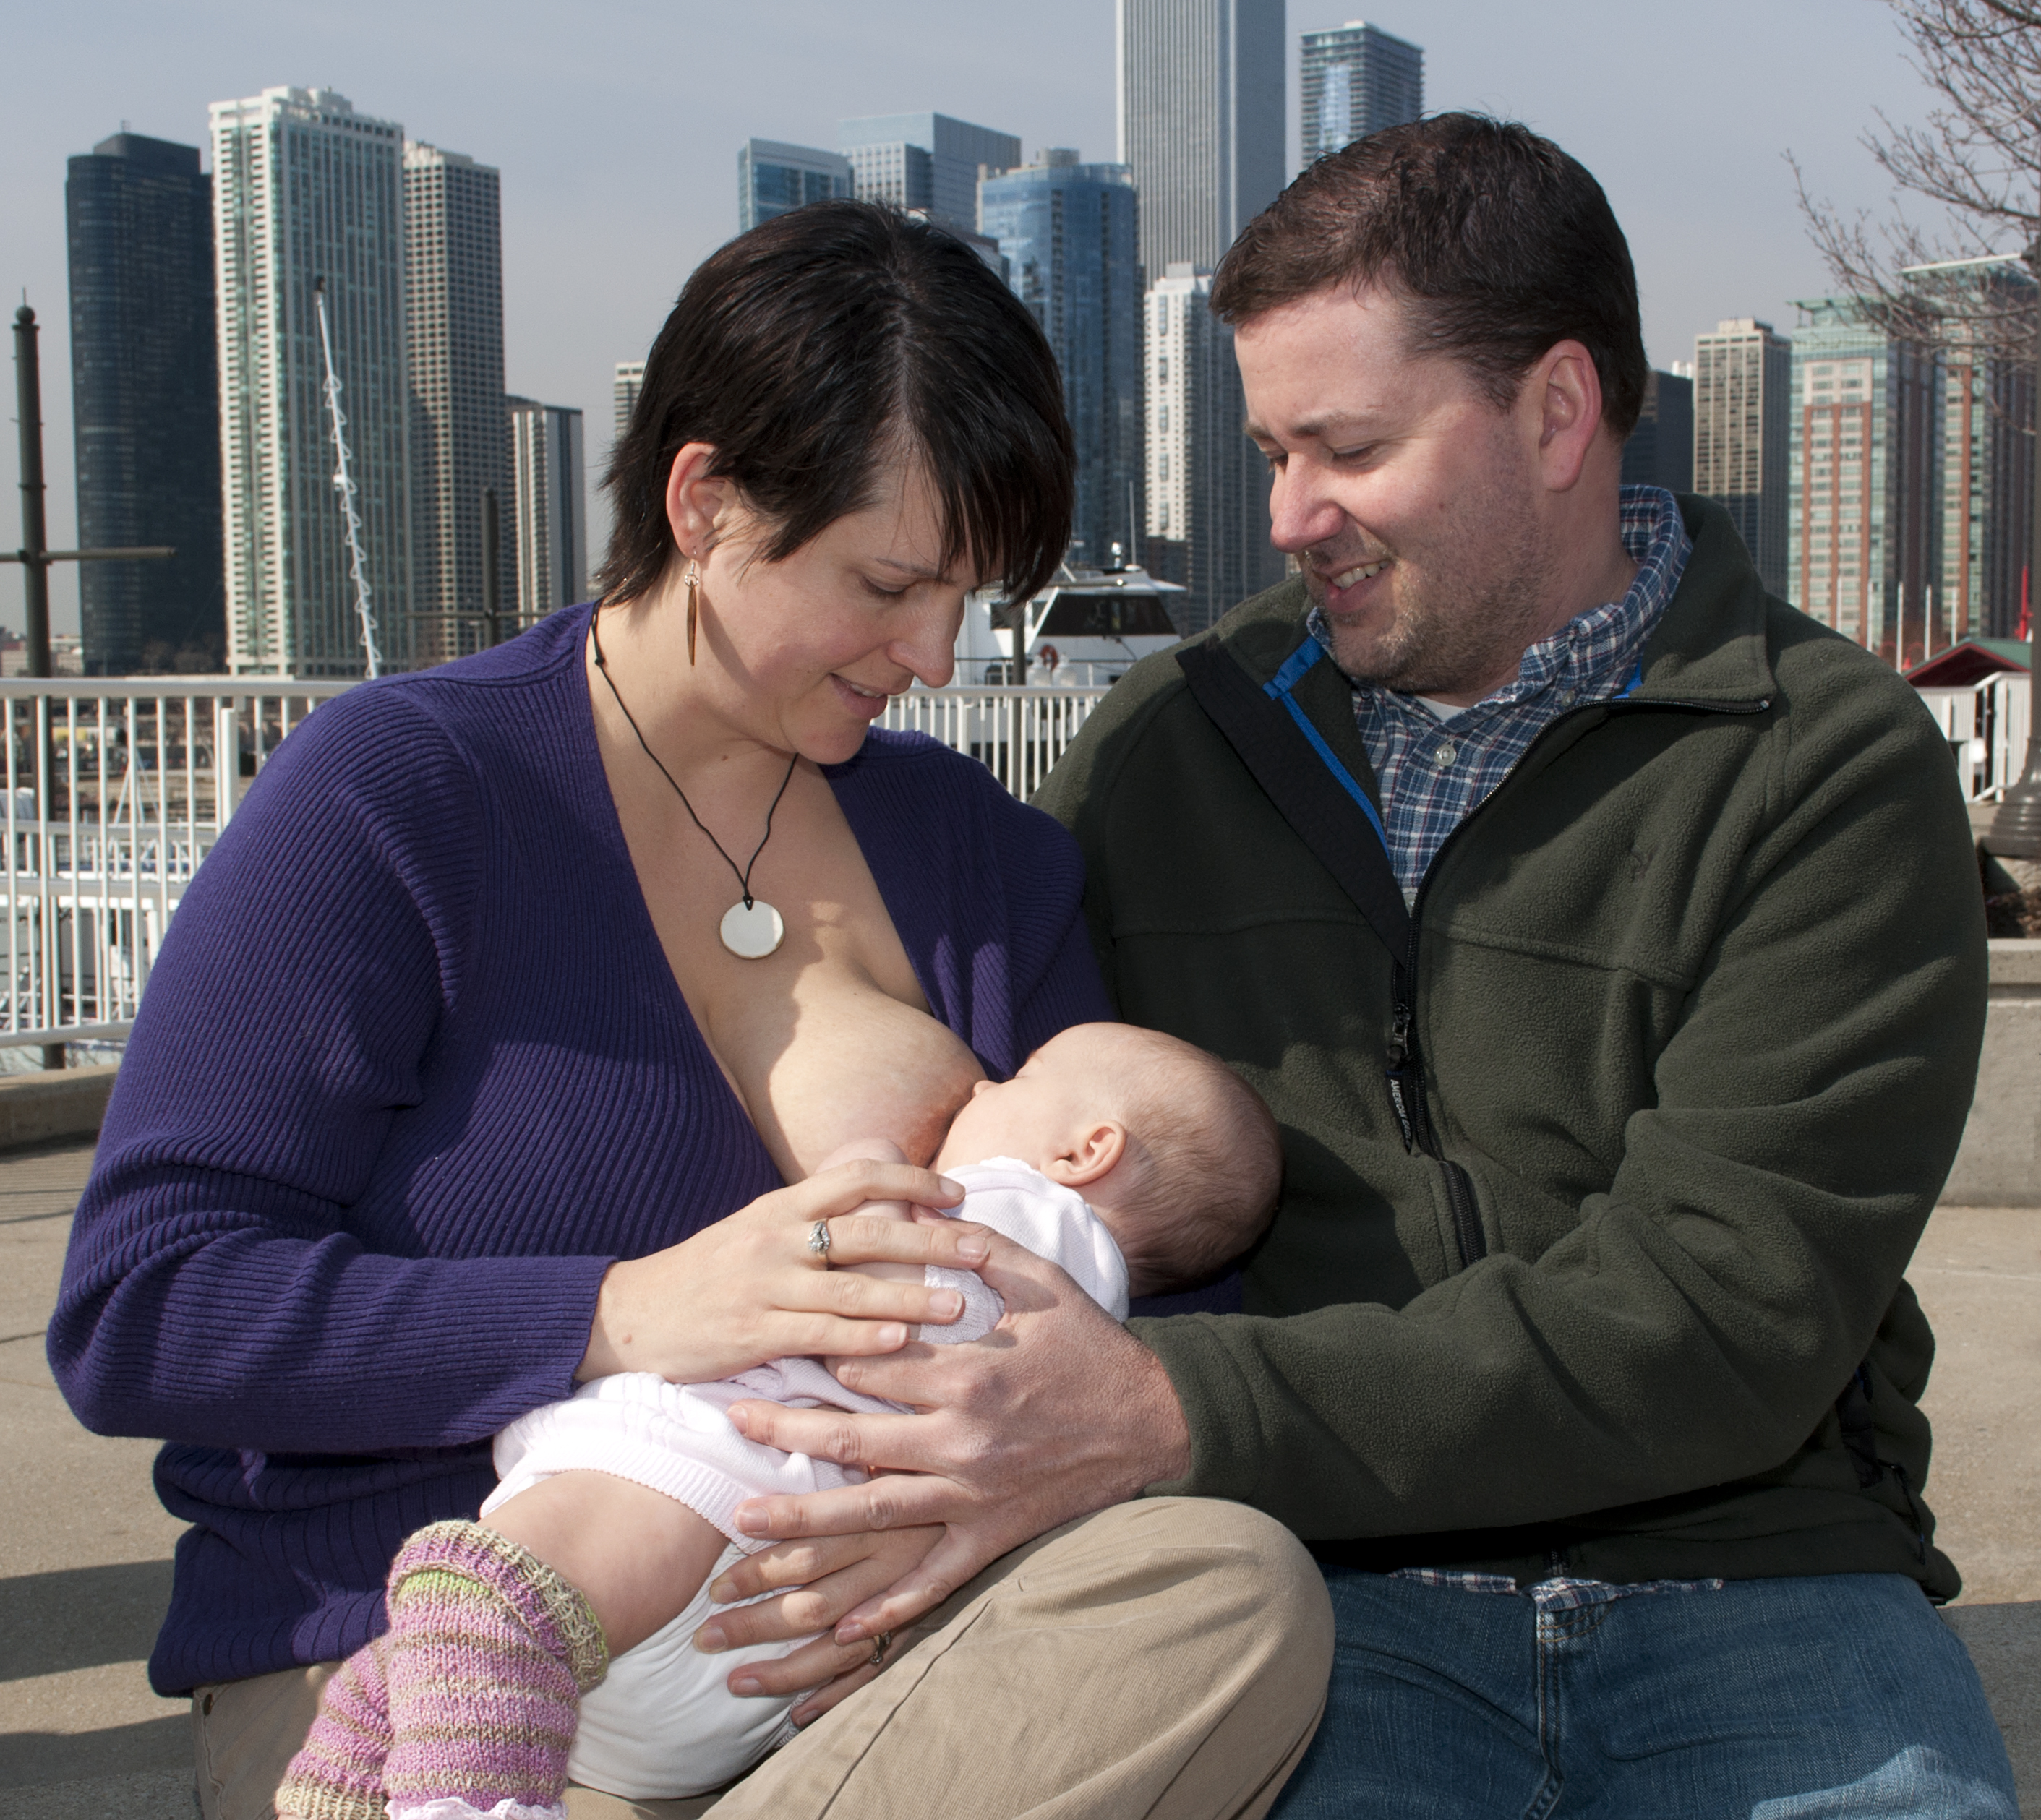 Breastfeed, Chicago!